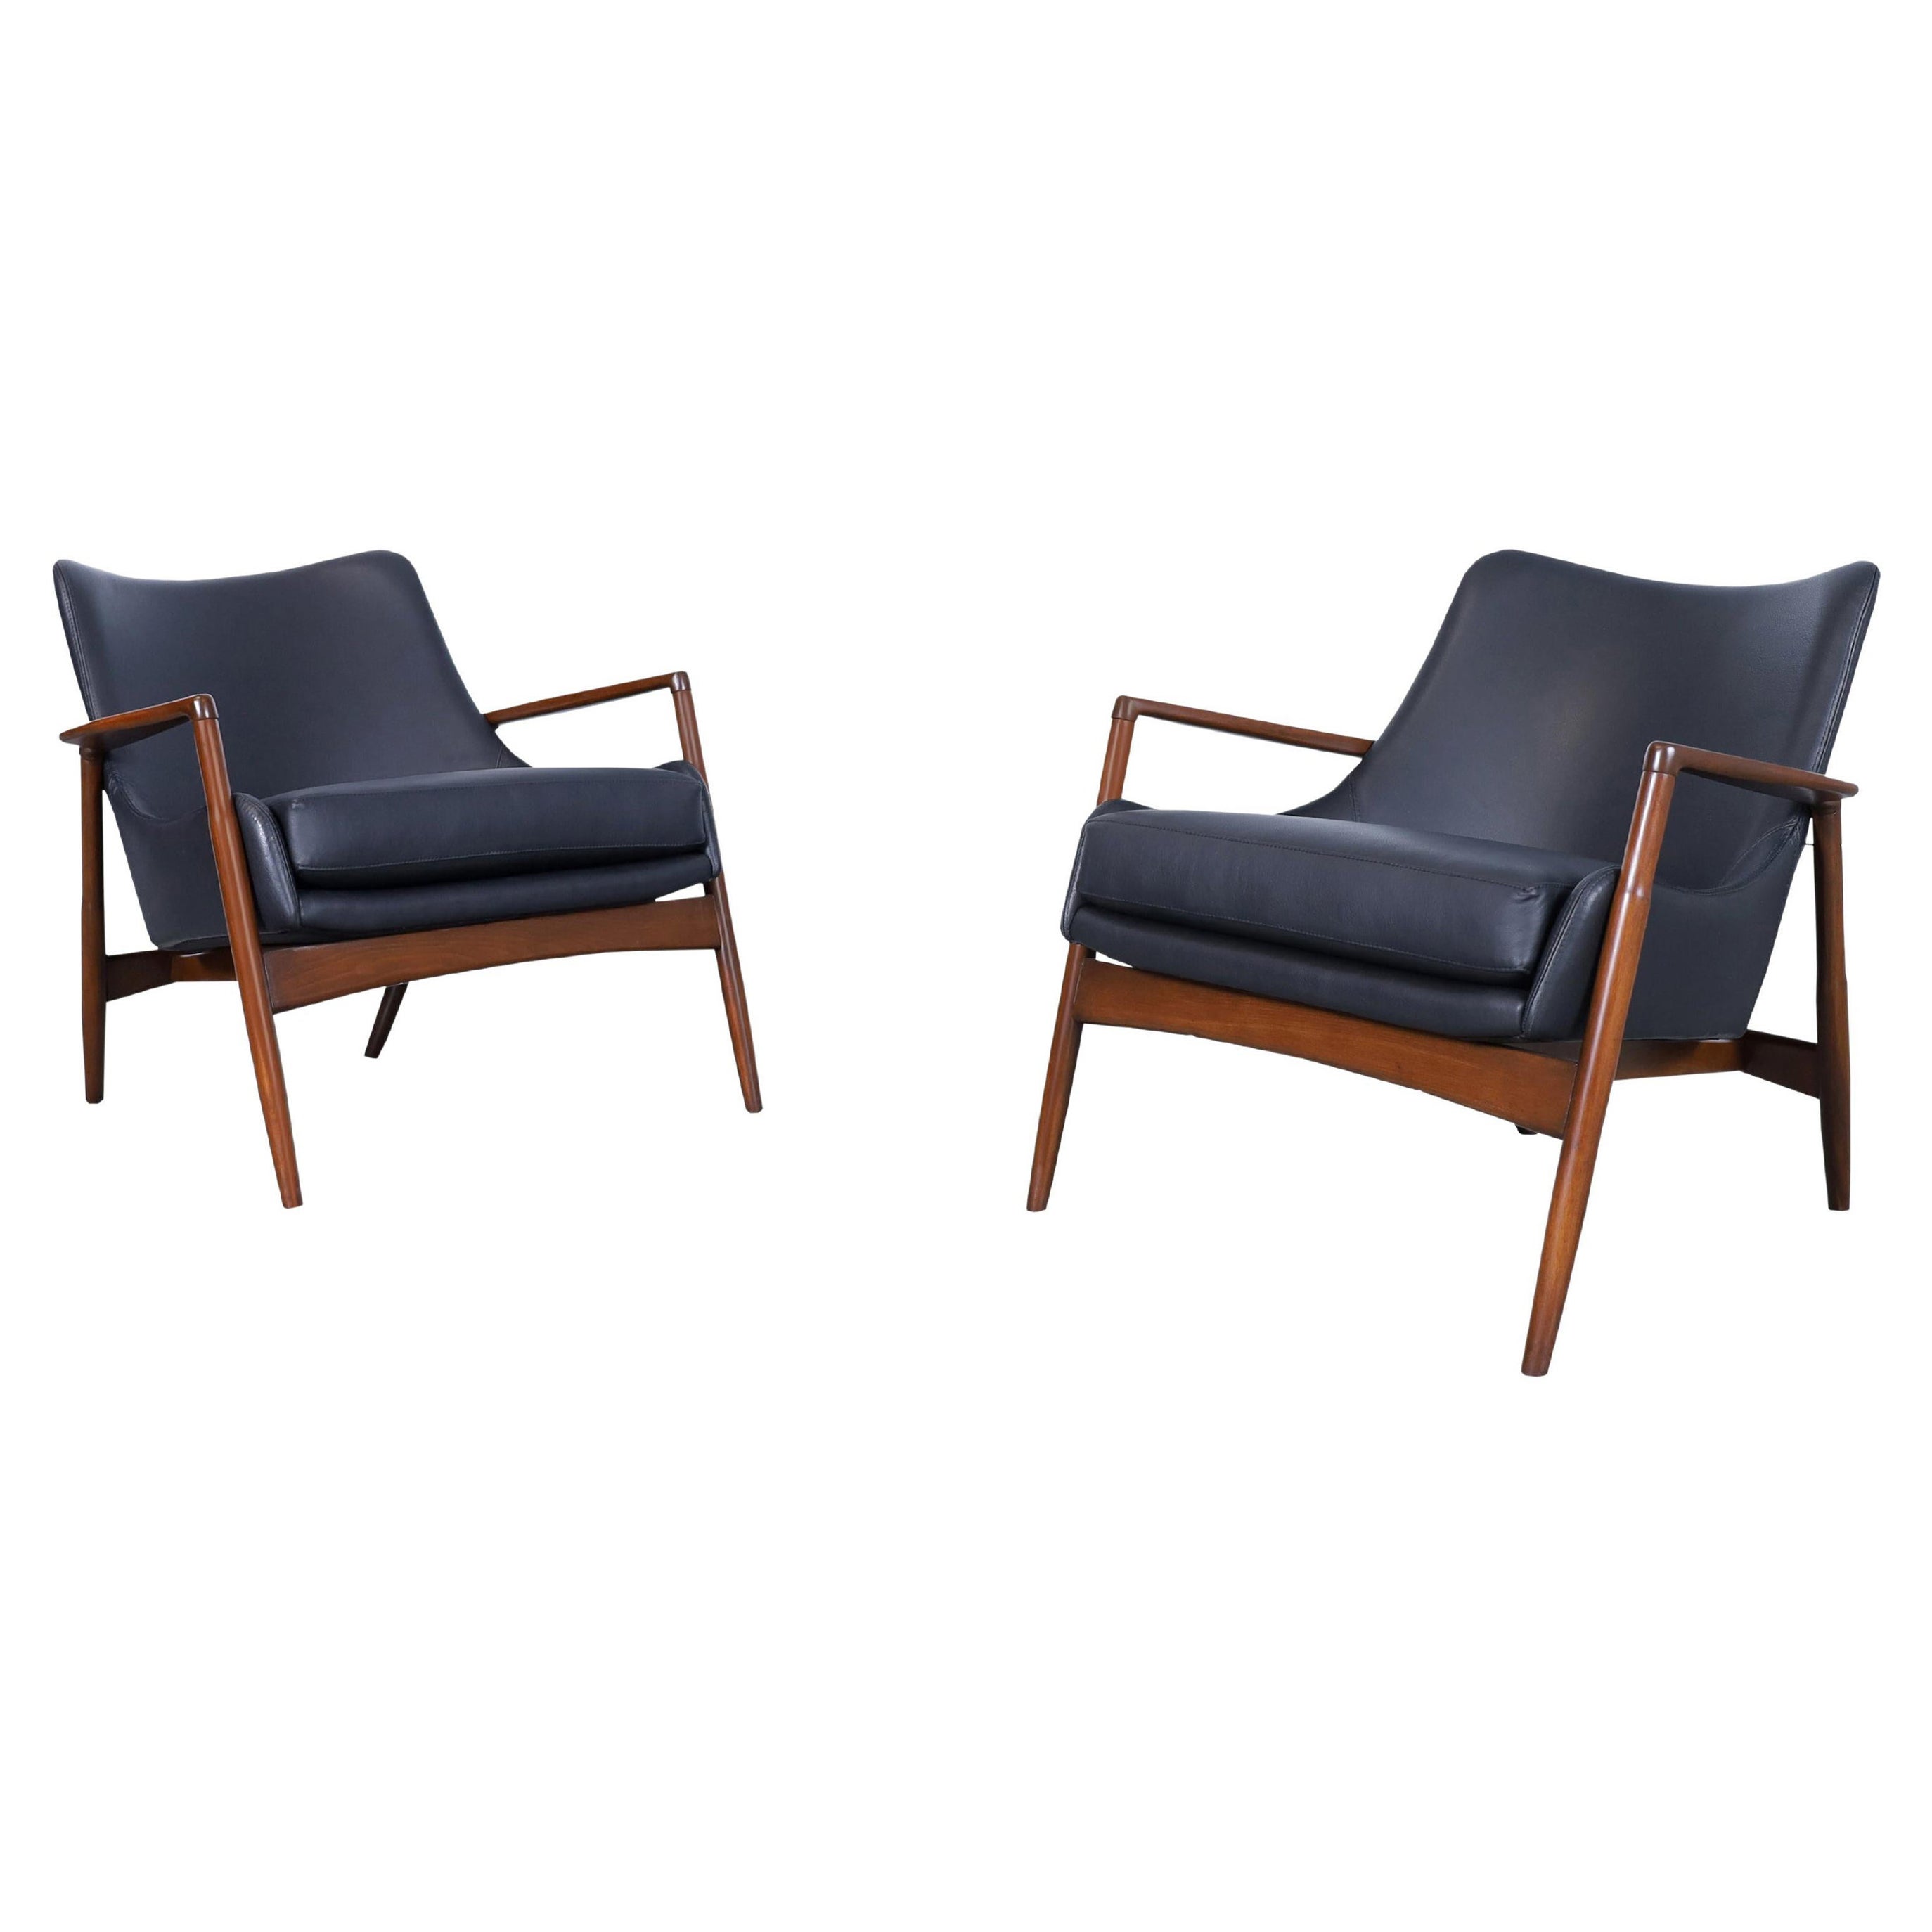 Danish Modern Leather Lounge Chairs by Ib Kofod Larsen for Selig